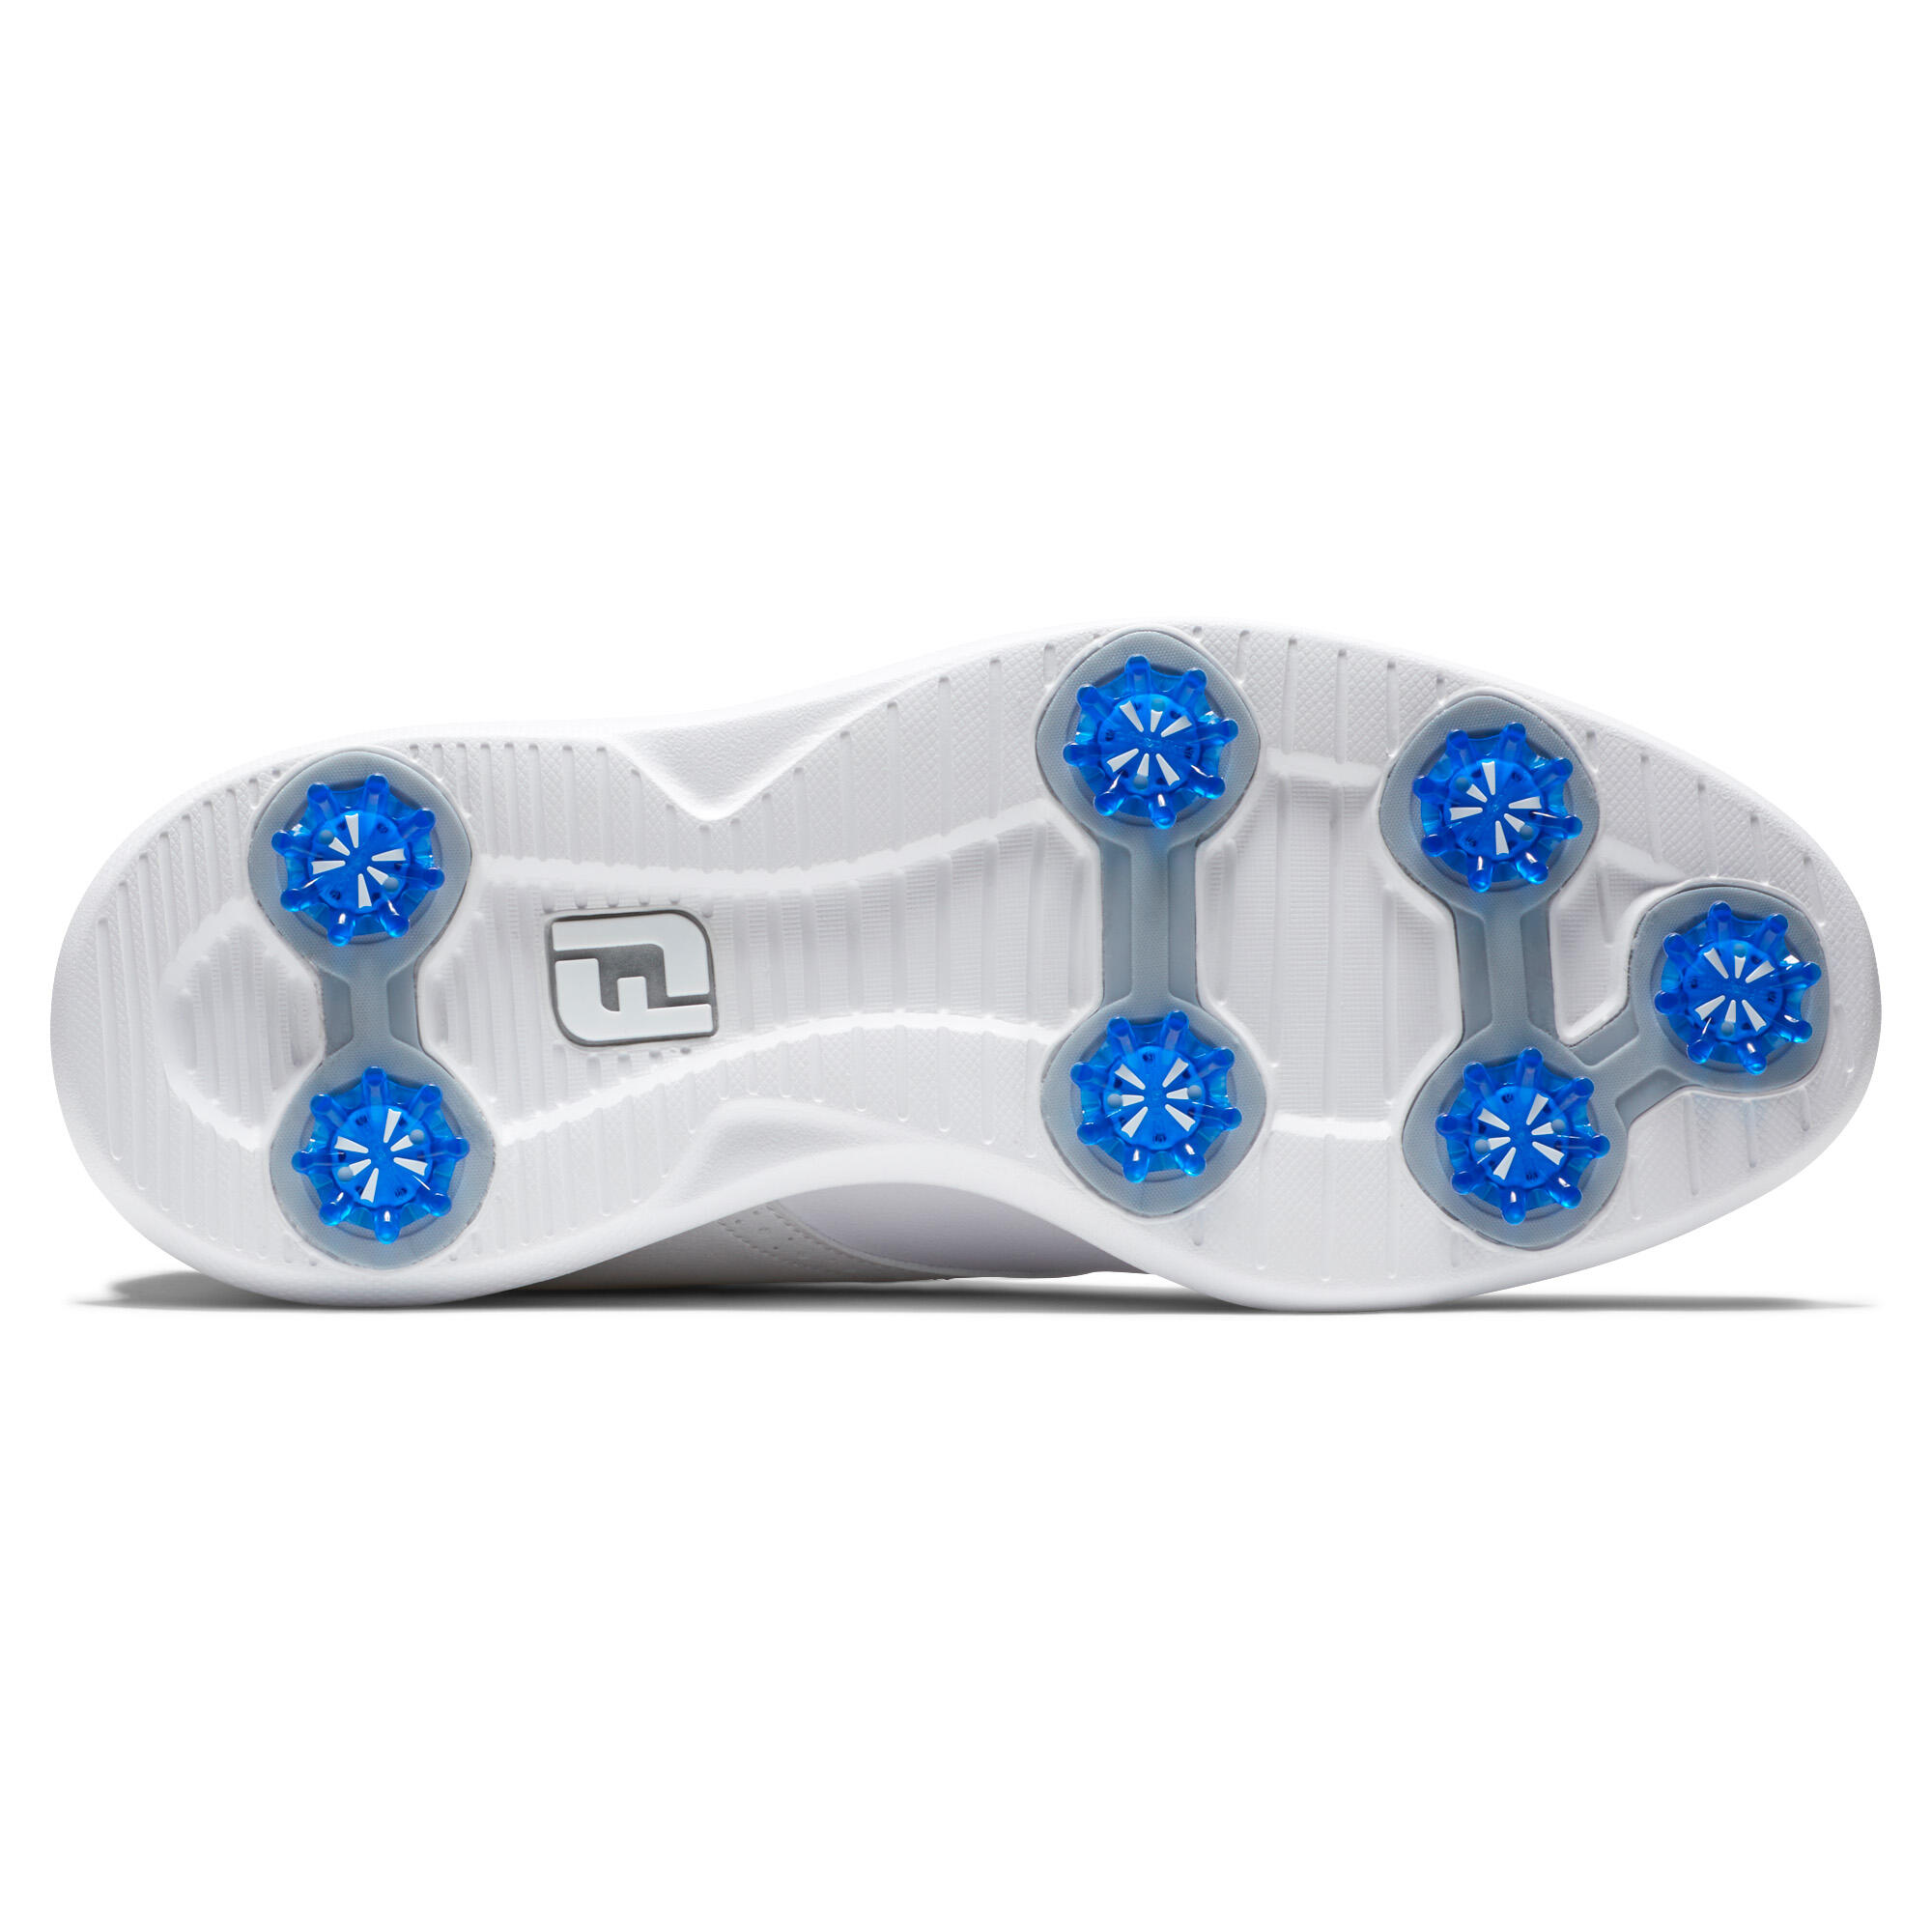 MEN'S GOLF SHOES FOOTJOY WATERPROOF - TRADITIONS WHITE 4/6